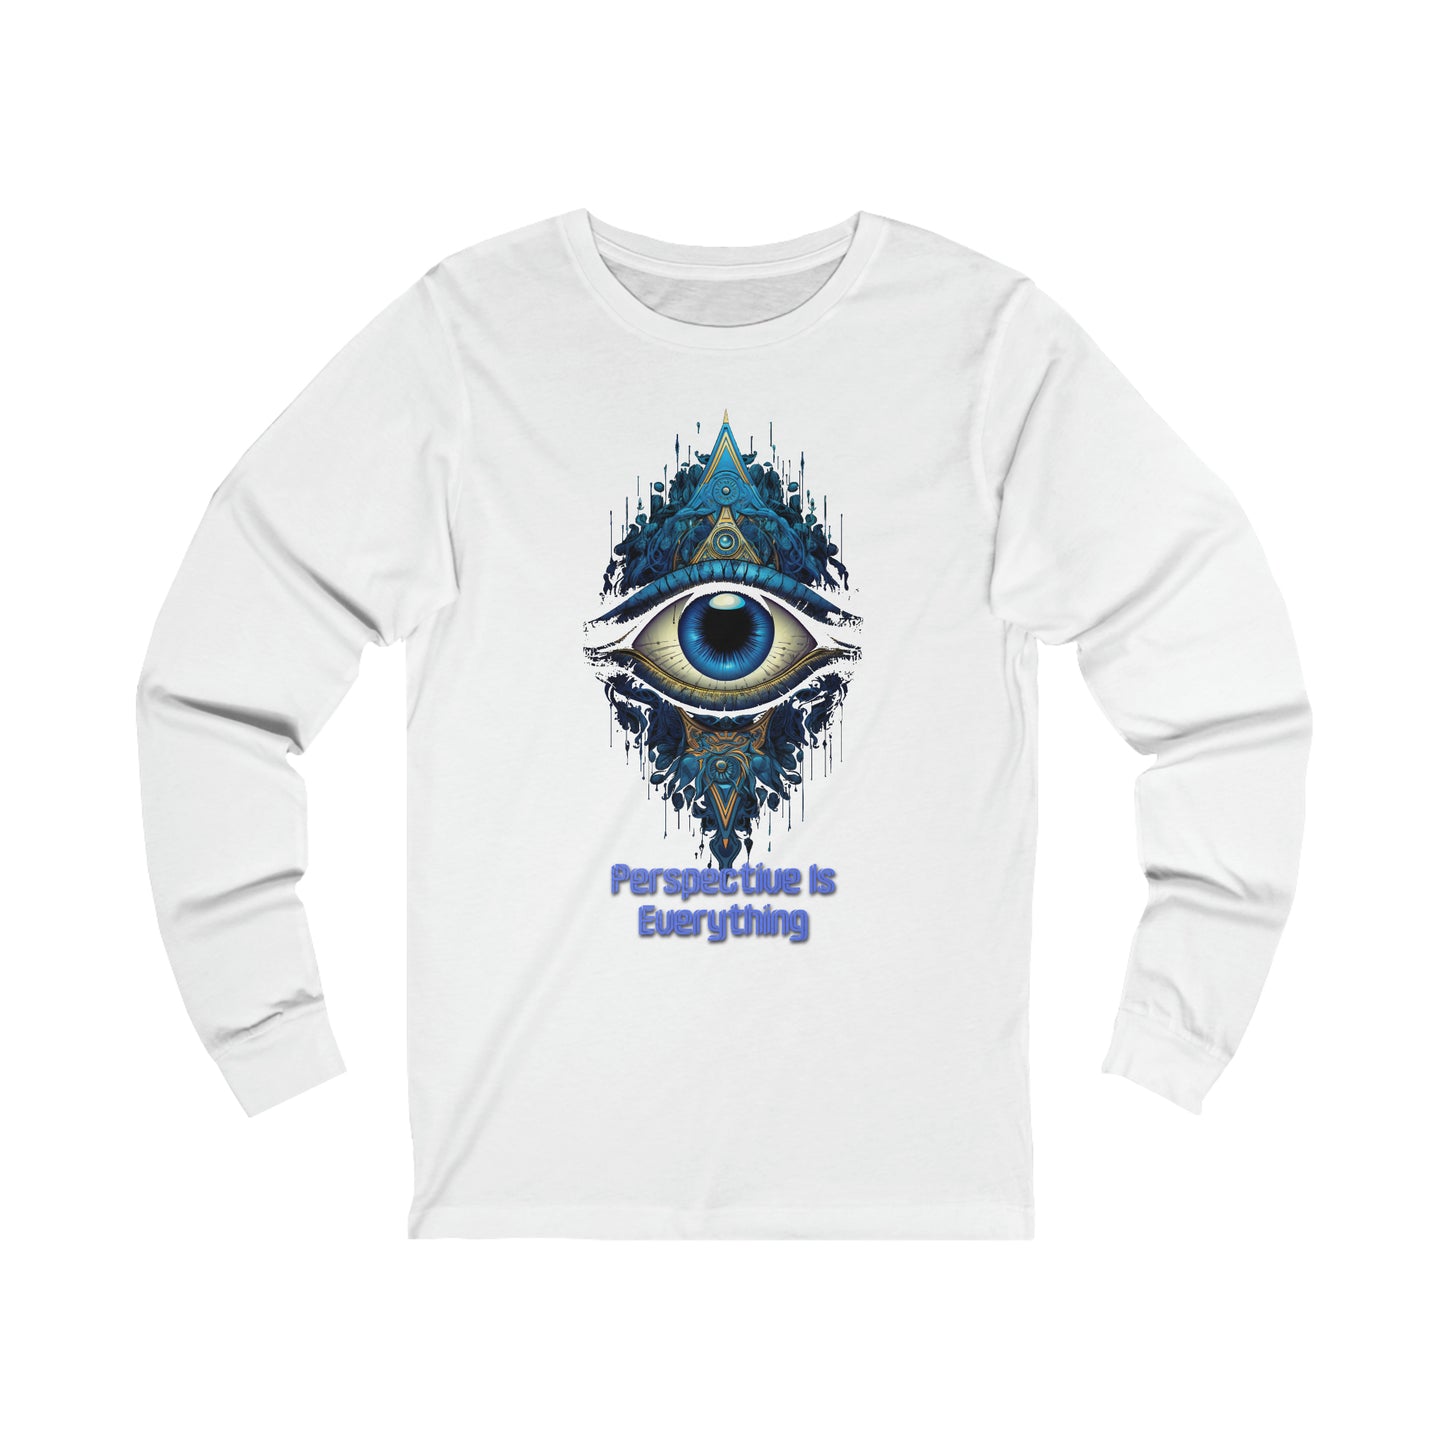 Perspective is Everything: Blue | Unisex Jersey Long Sleeve Tee